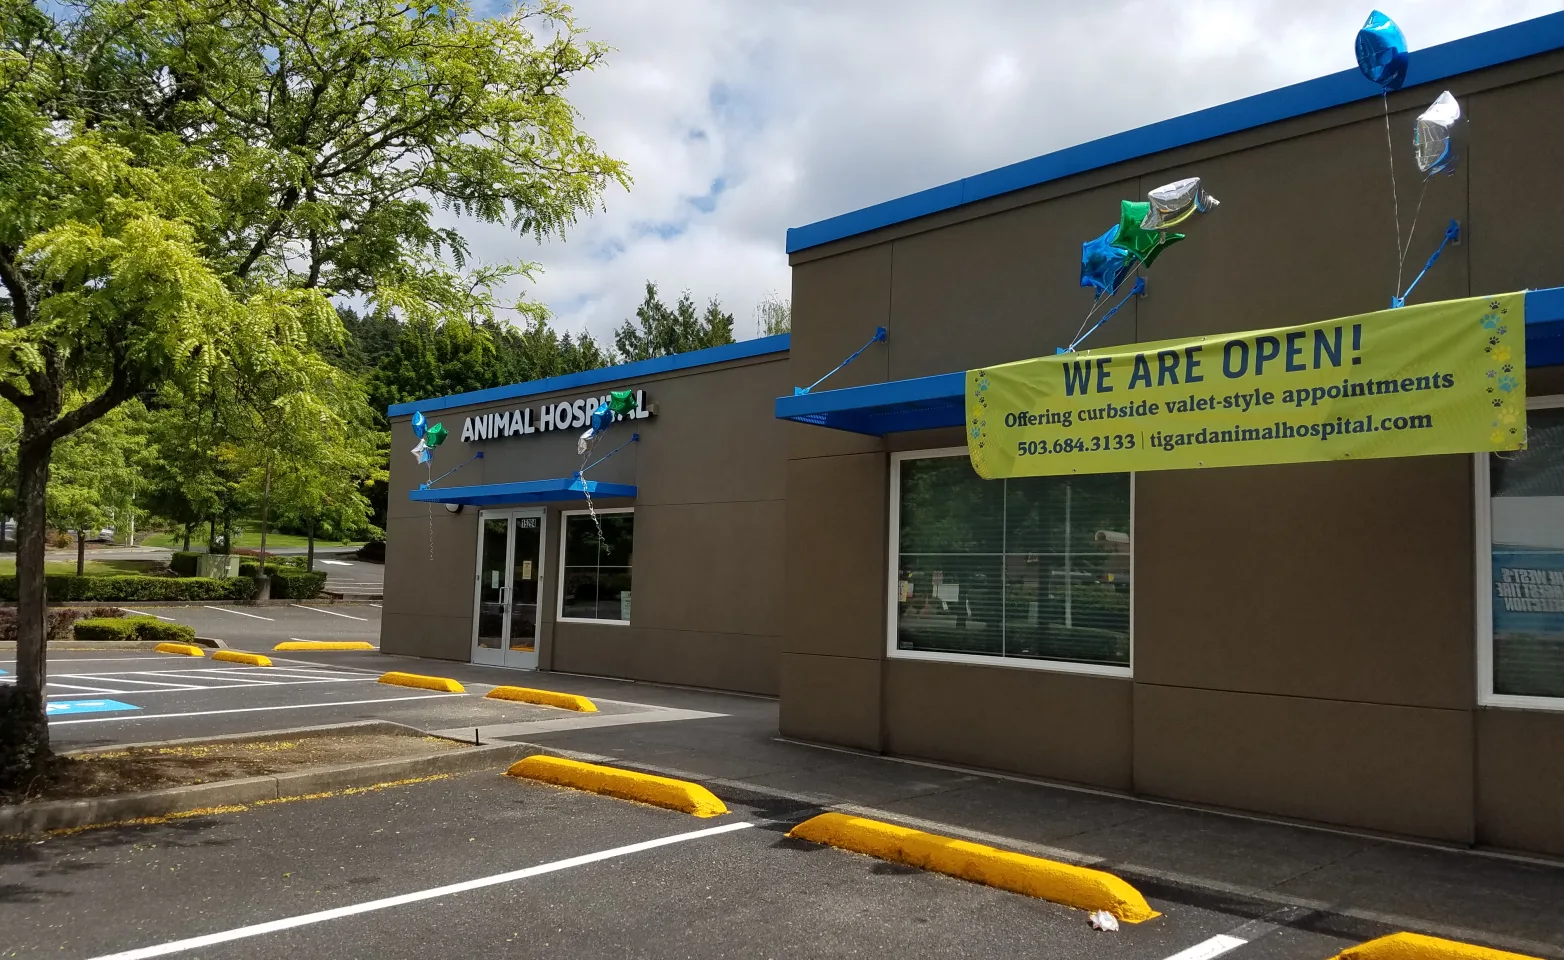 Future home of Tigard Animal Hospital with "We are Open!" sign